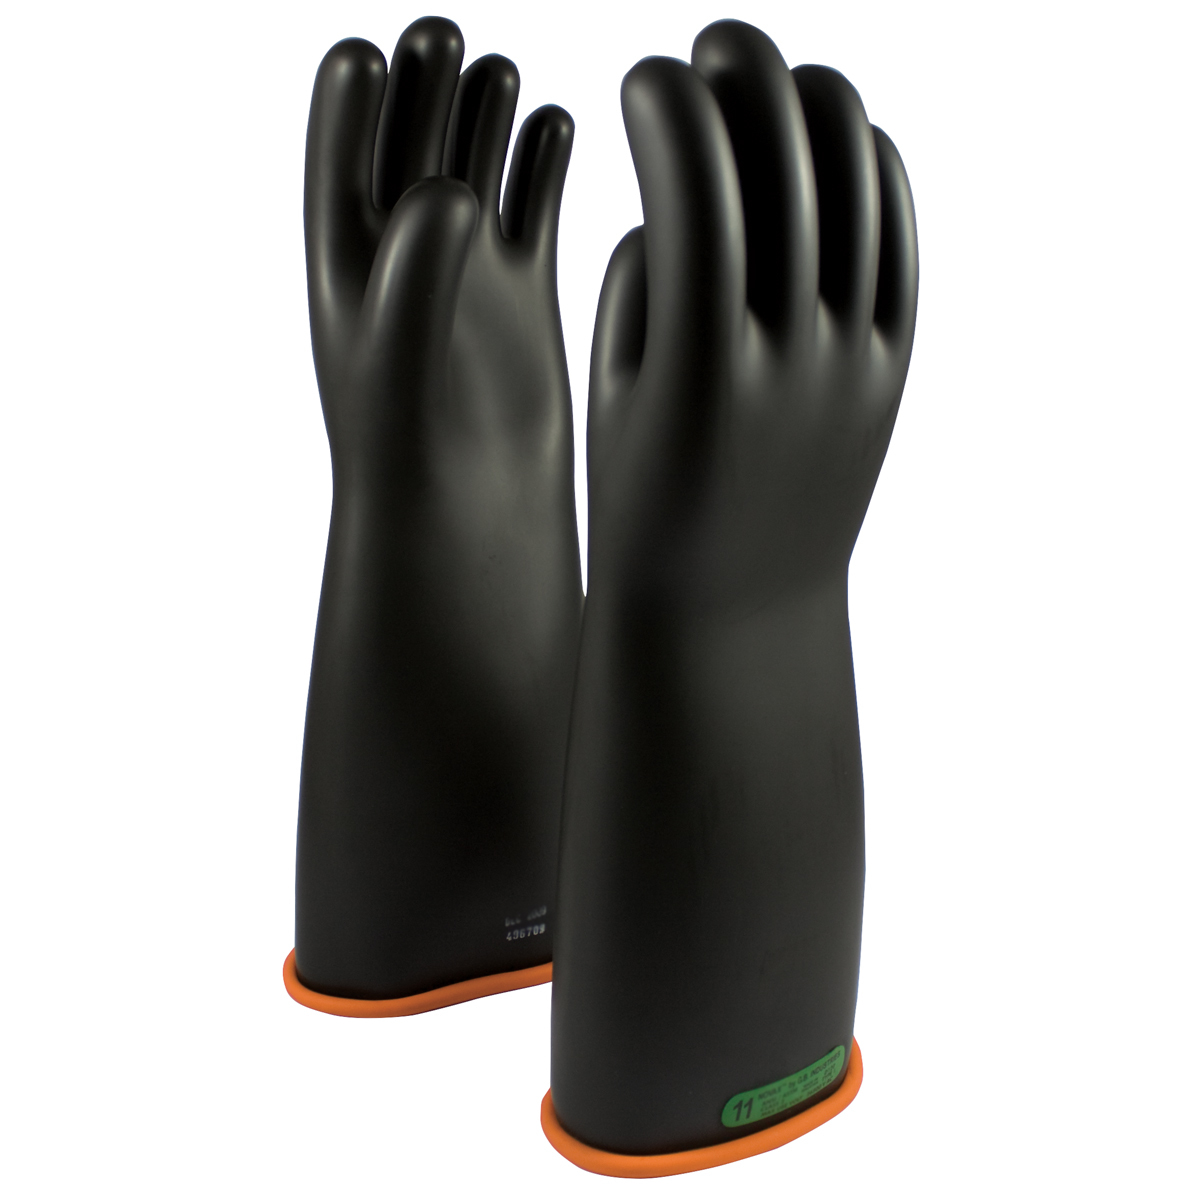 PIP® Size 11 Black Rubber Class 2 Linesmens Gloves